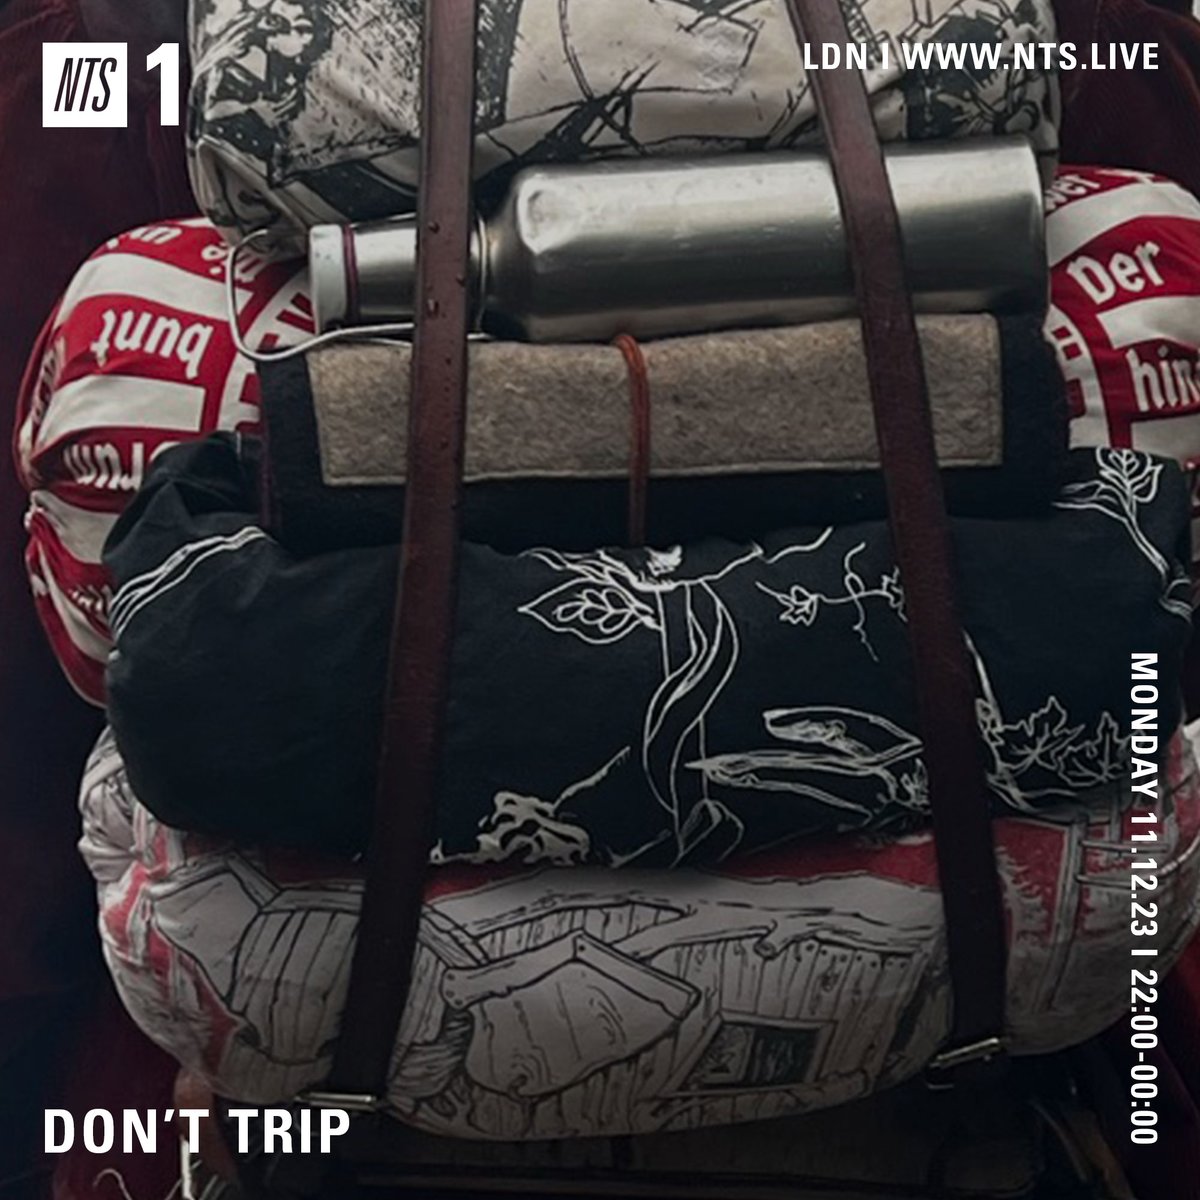 Two more hours of @mirroredpalm on Don't Trip - rolling live now at nts.live/1